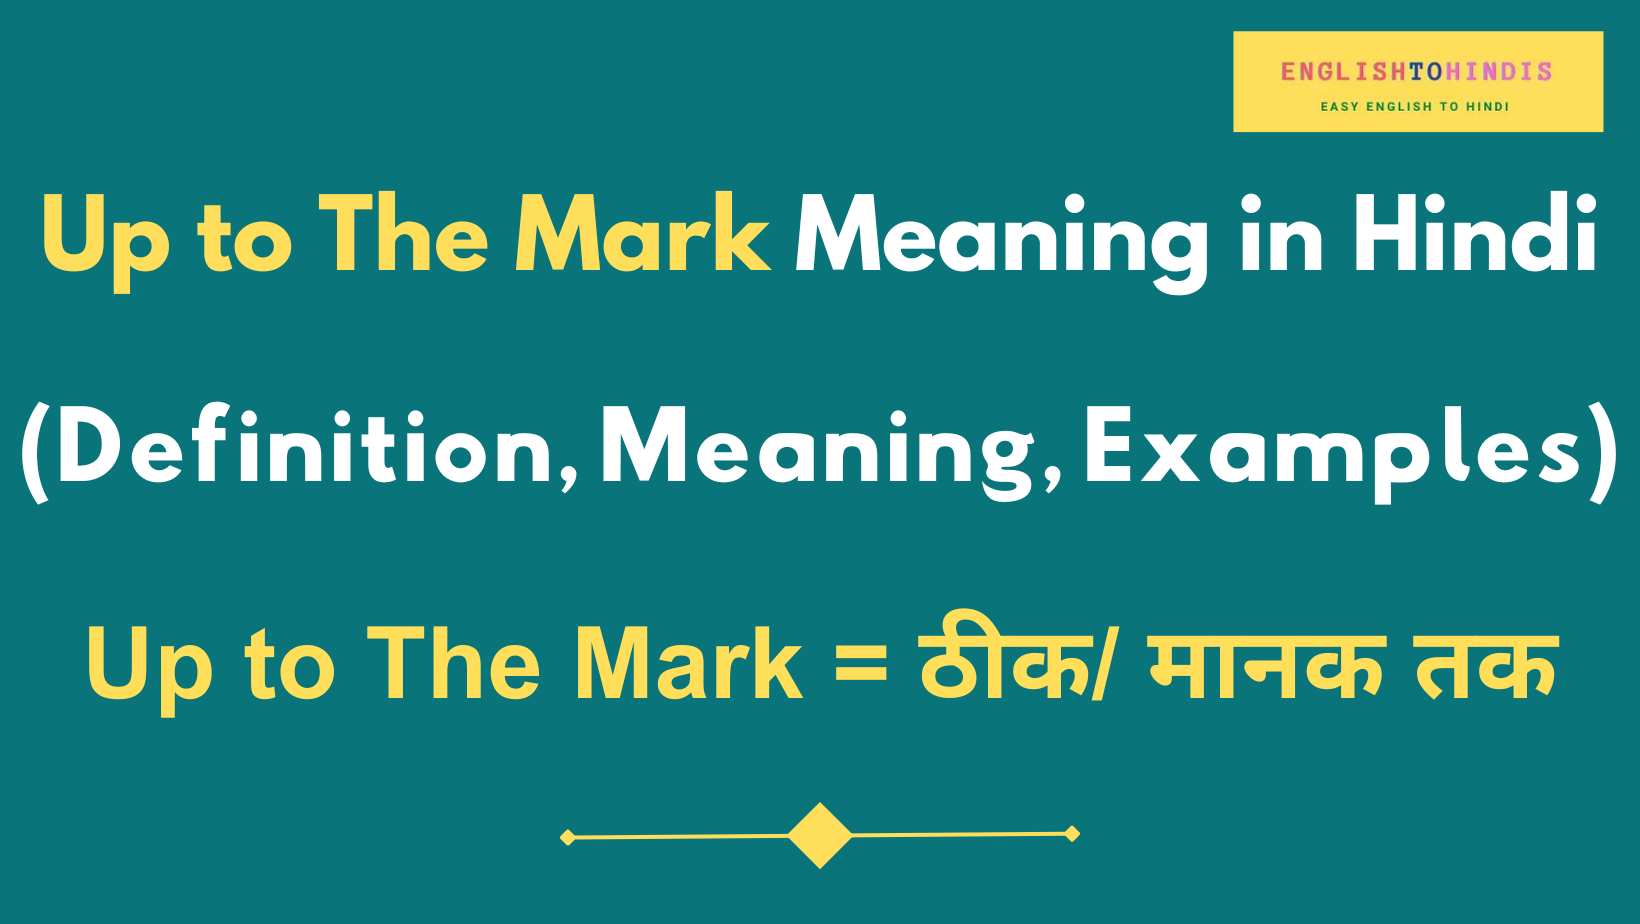 Up to The Mark Meaning in Hindi